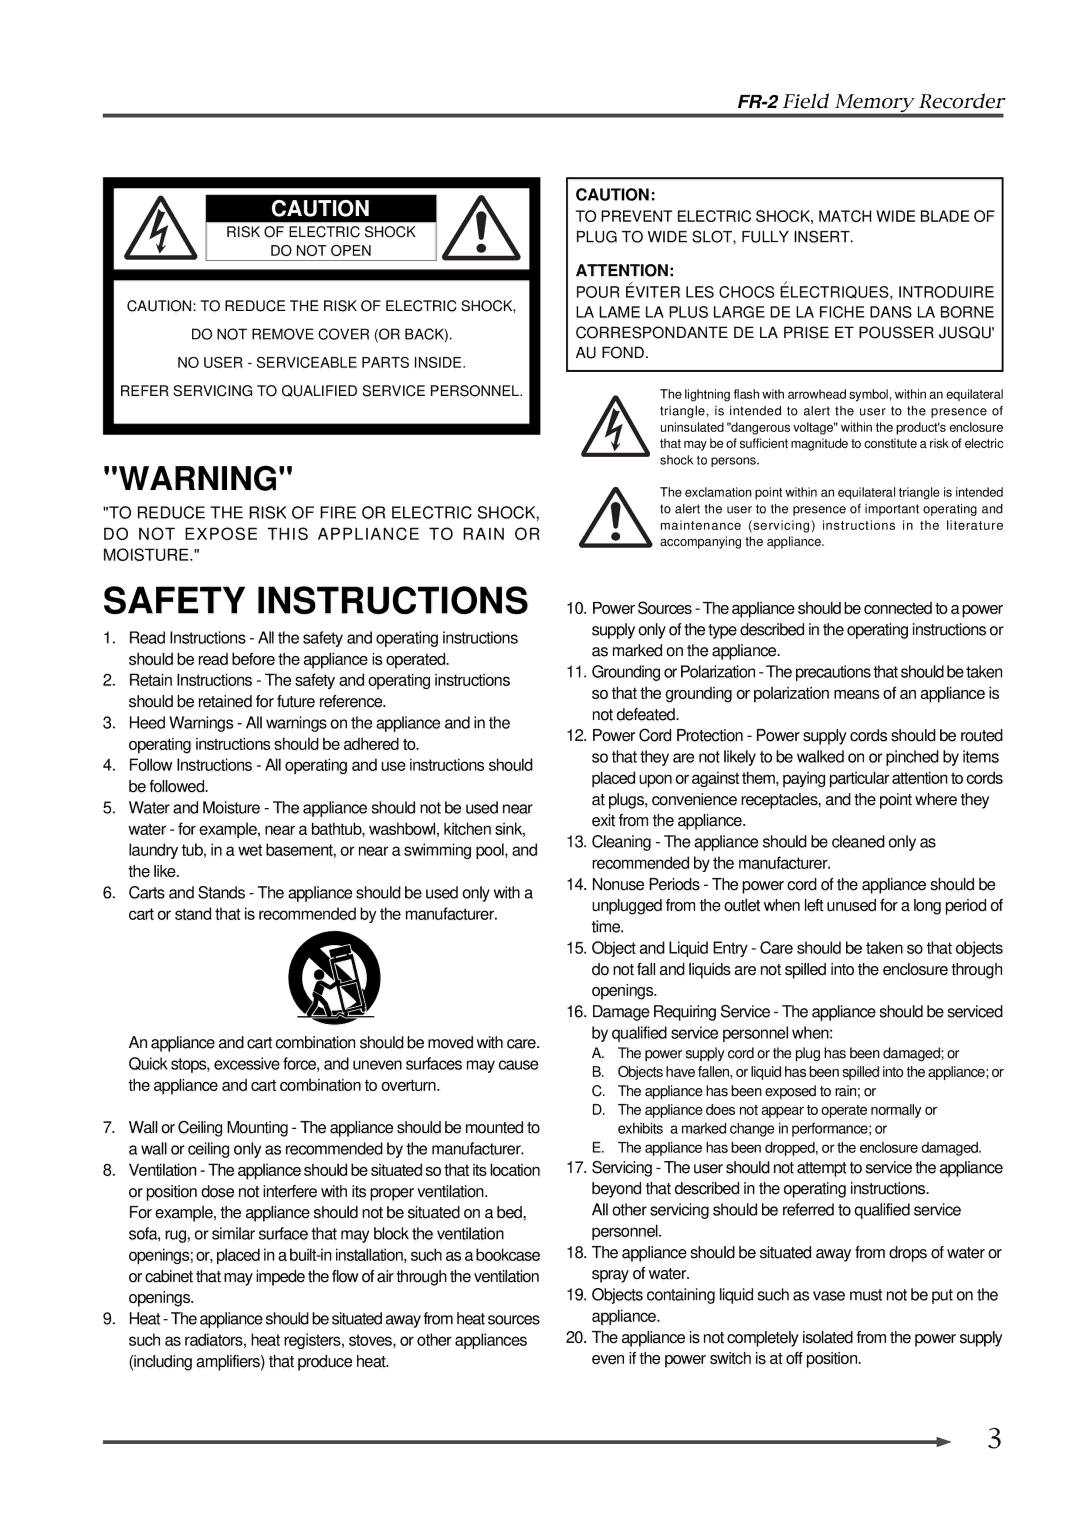 Fostex FR-2 owner manual Safety Instructions 